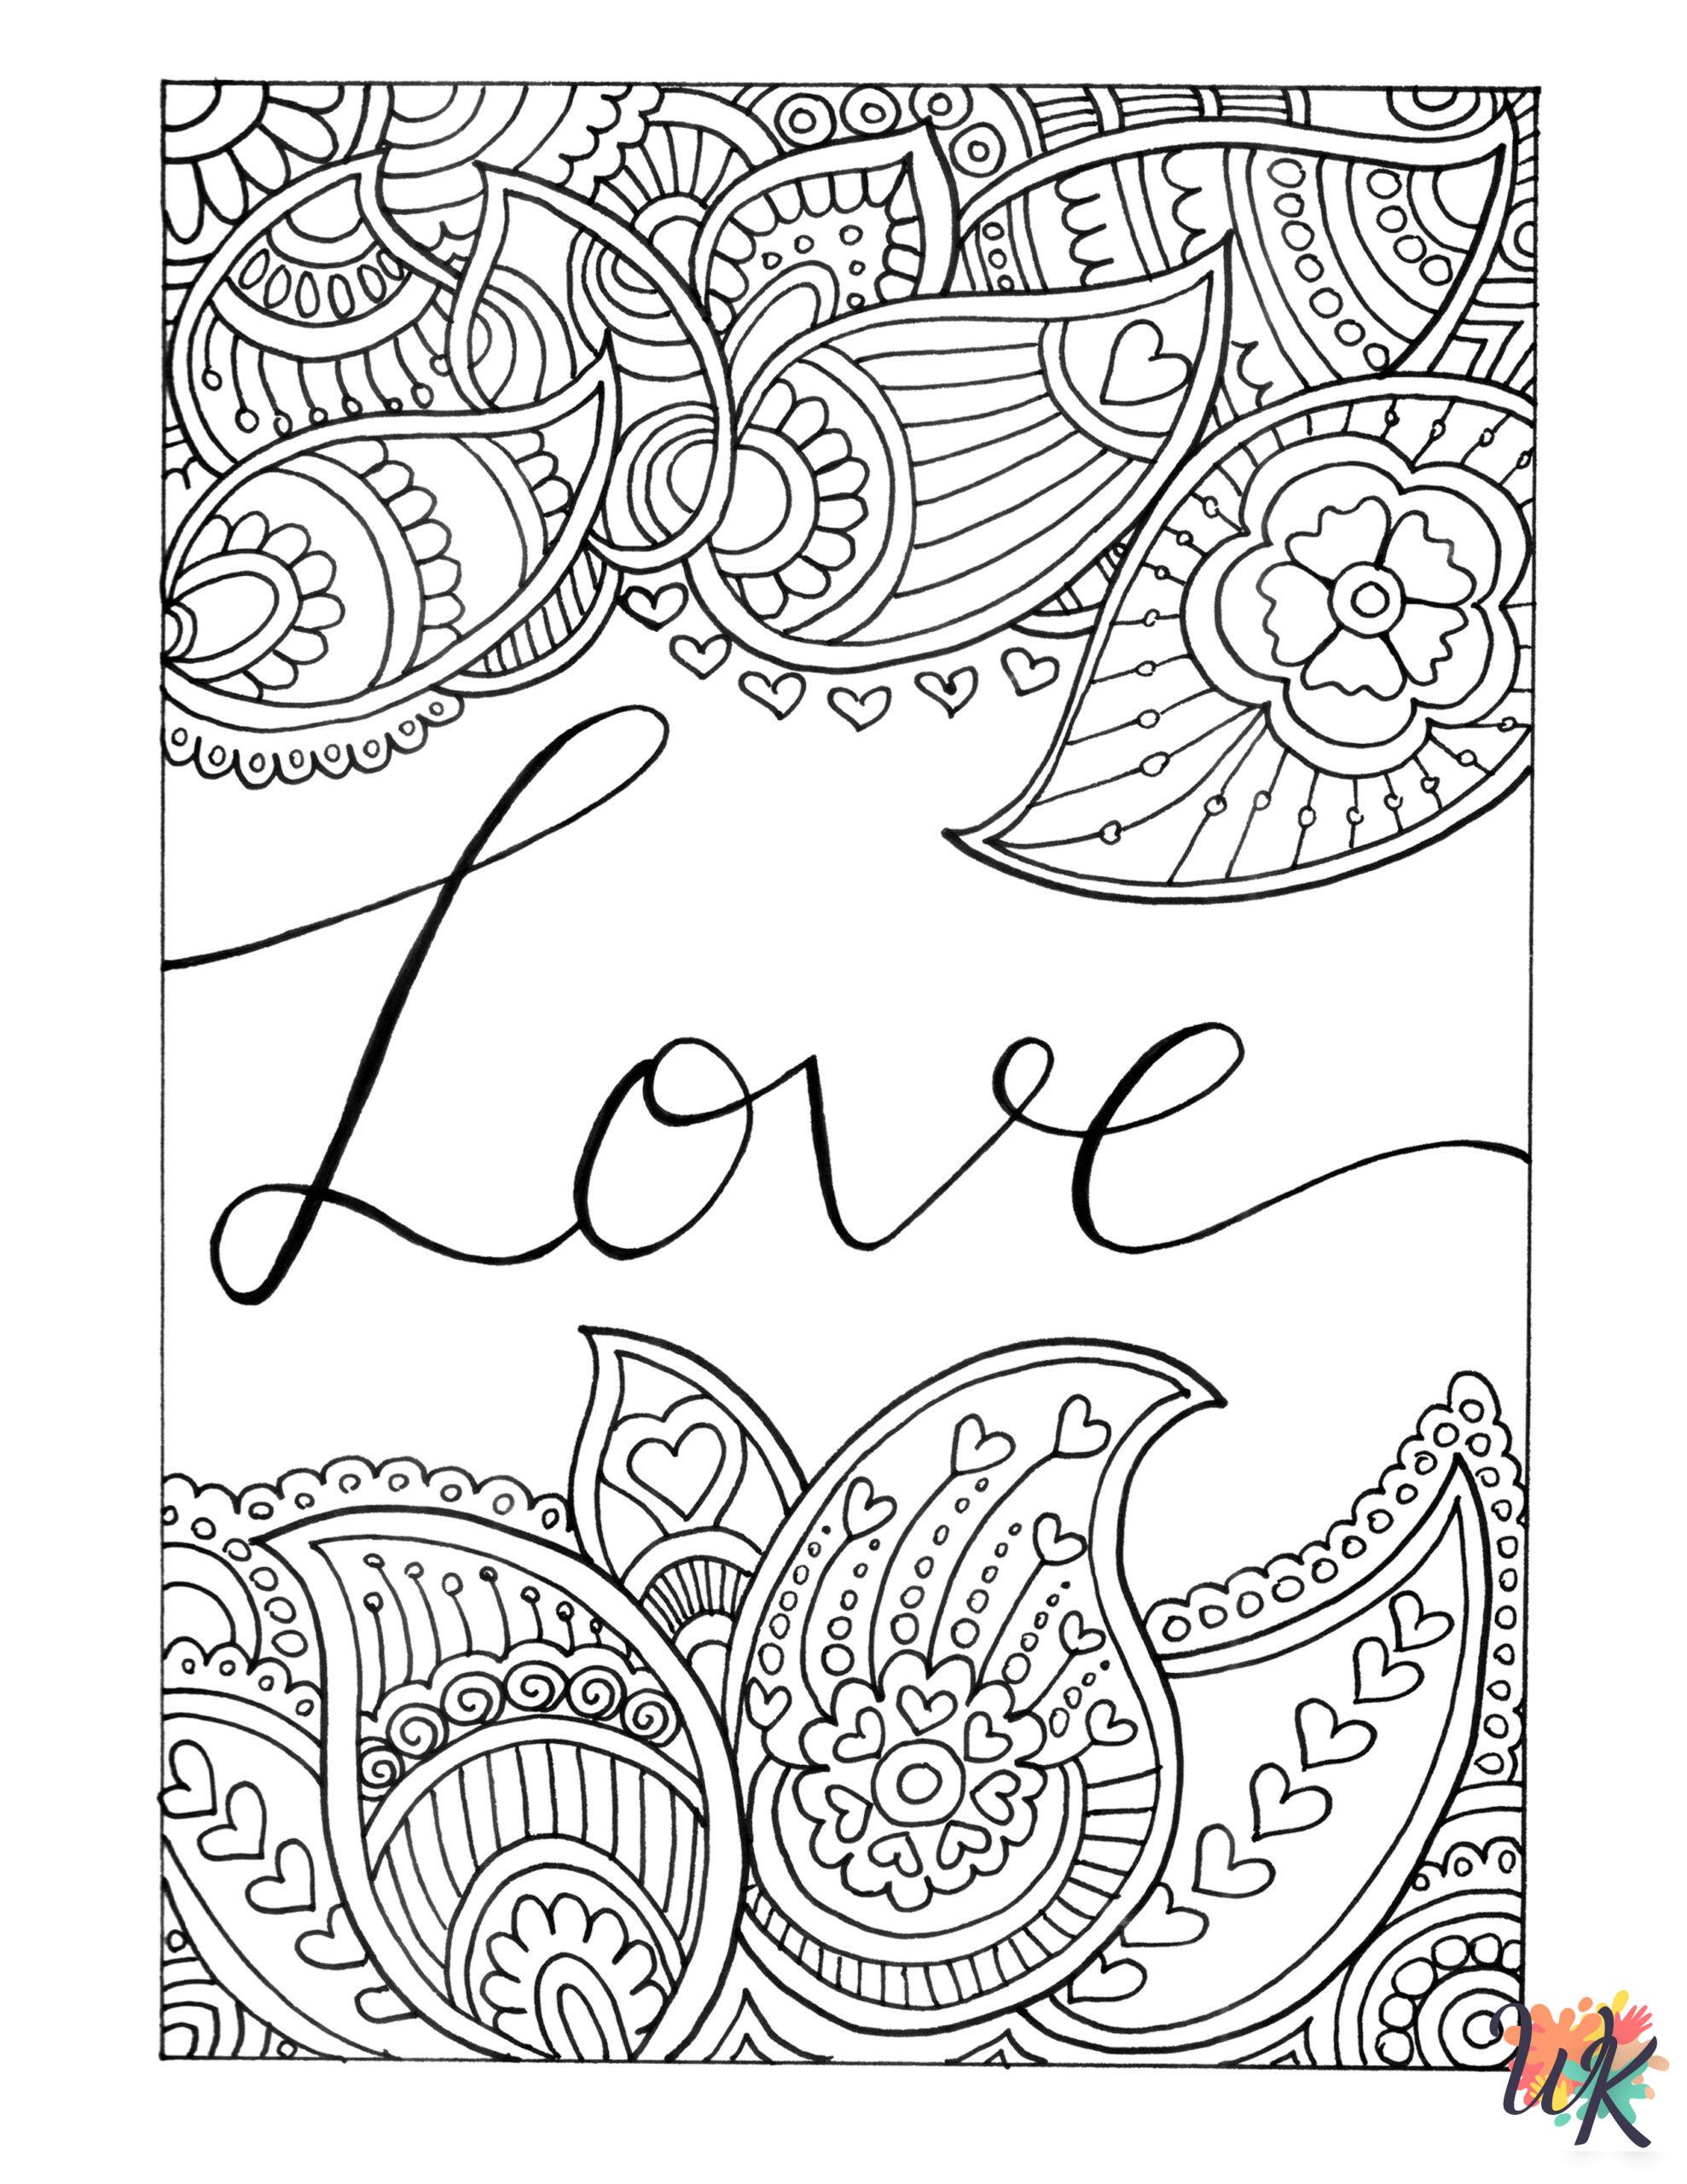 Valentine's Day free coloring pages